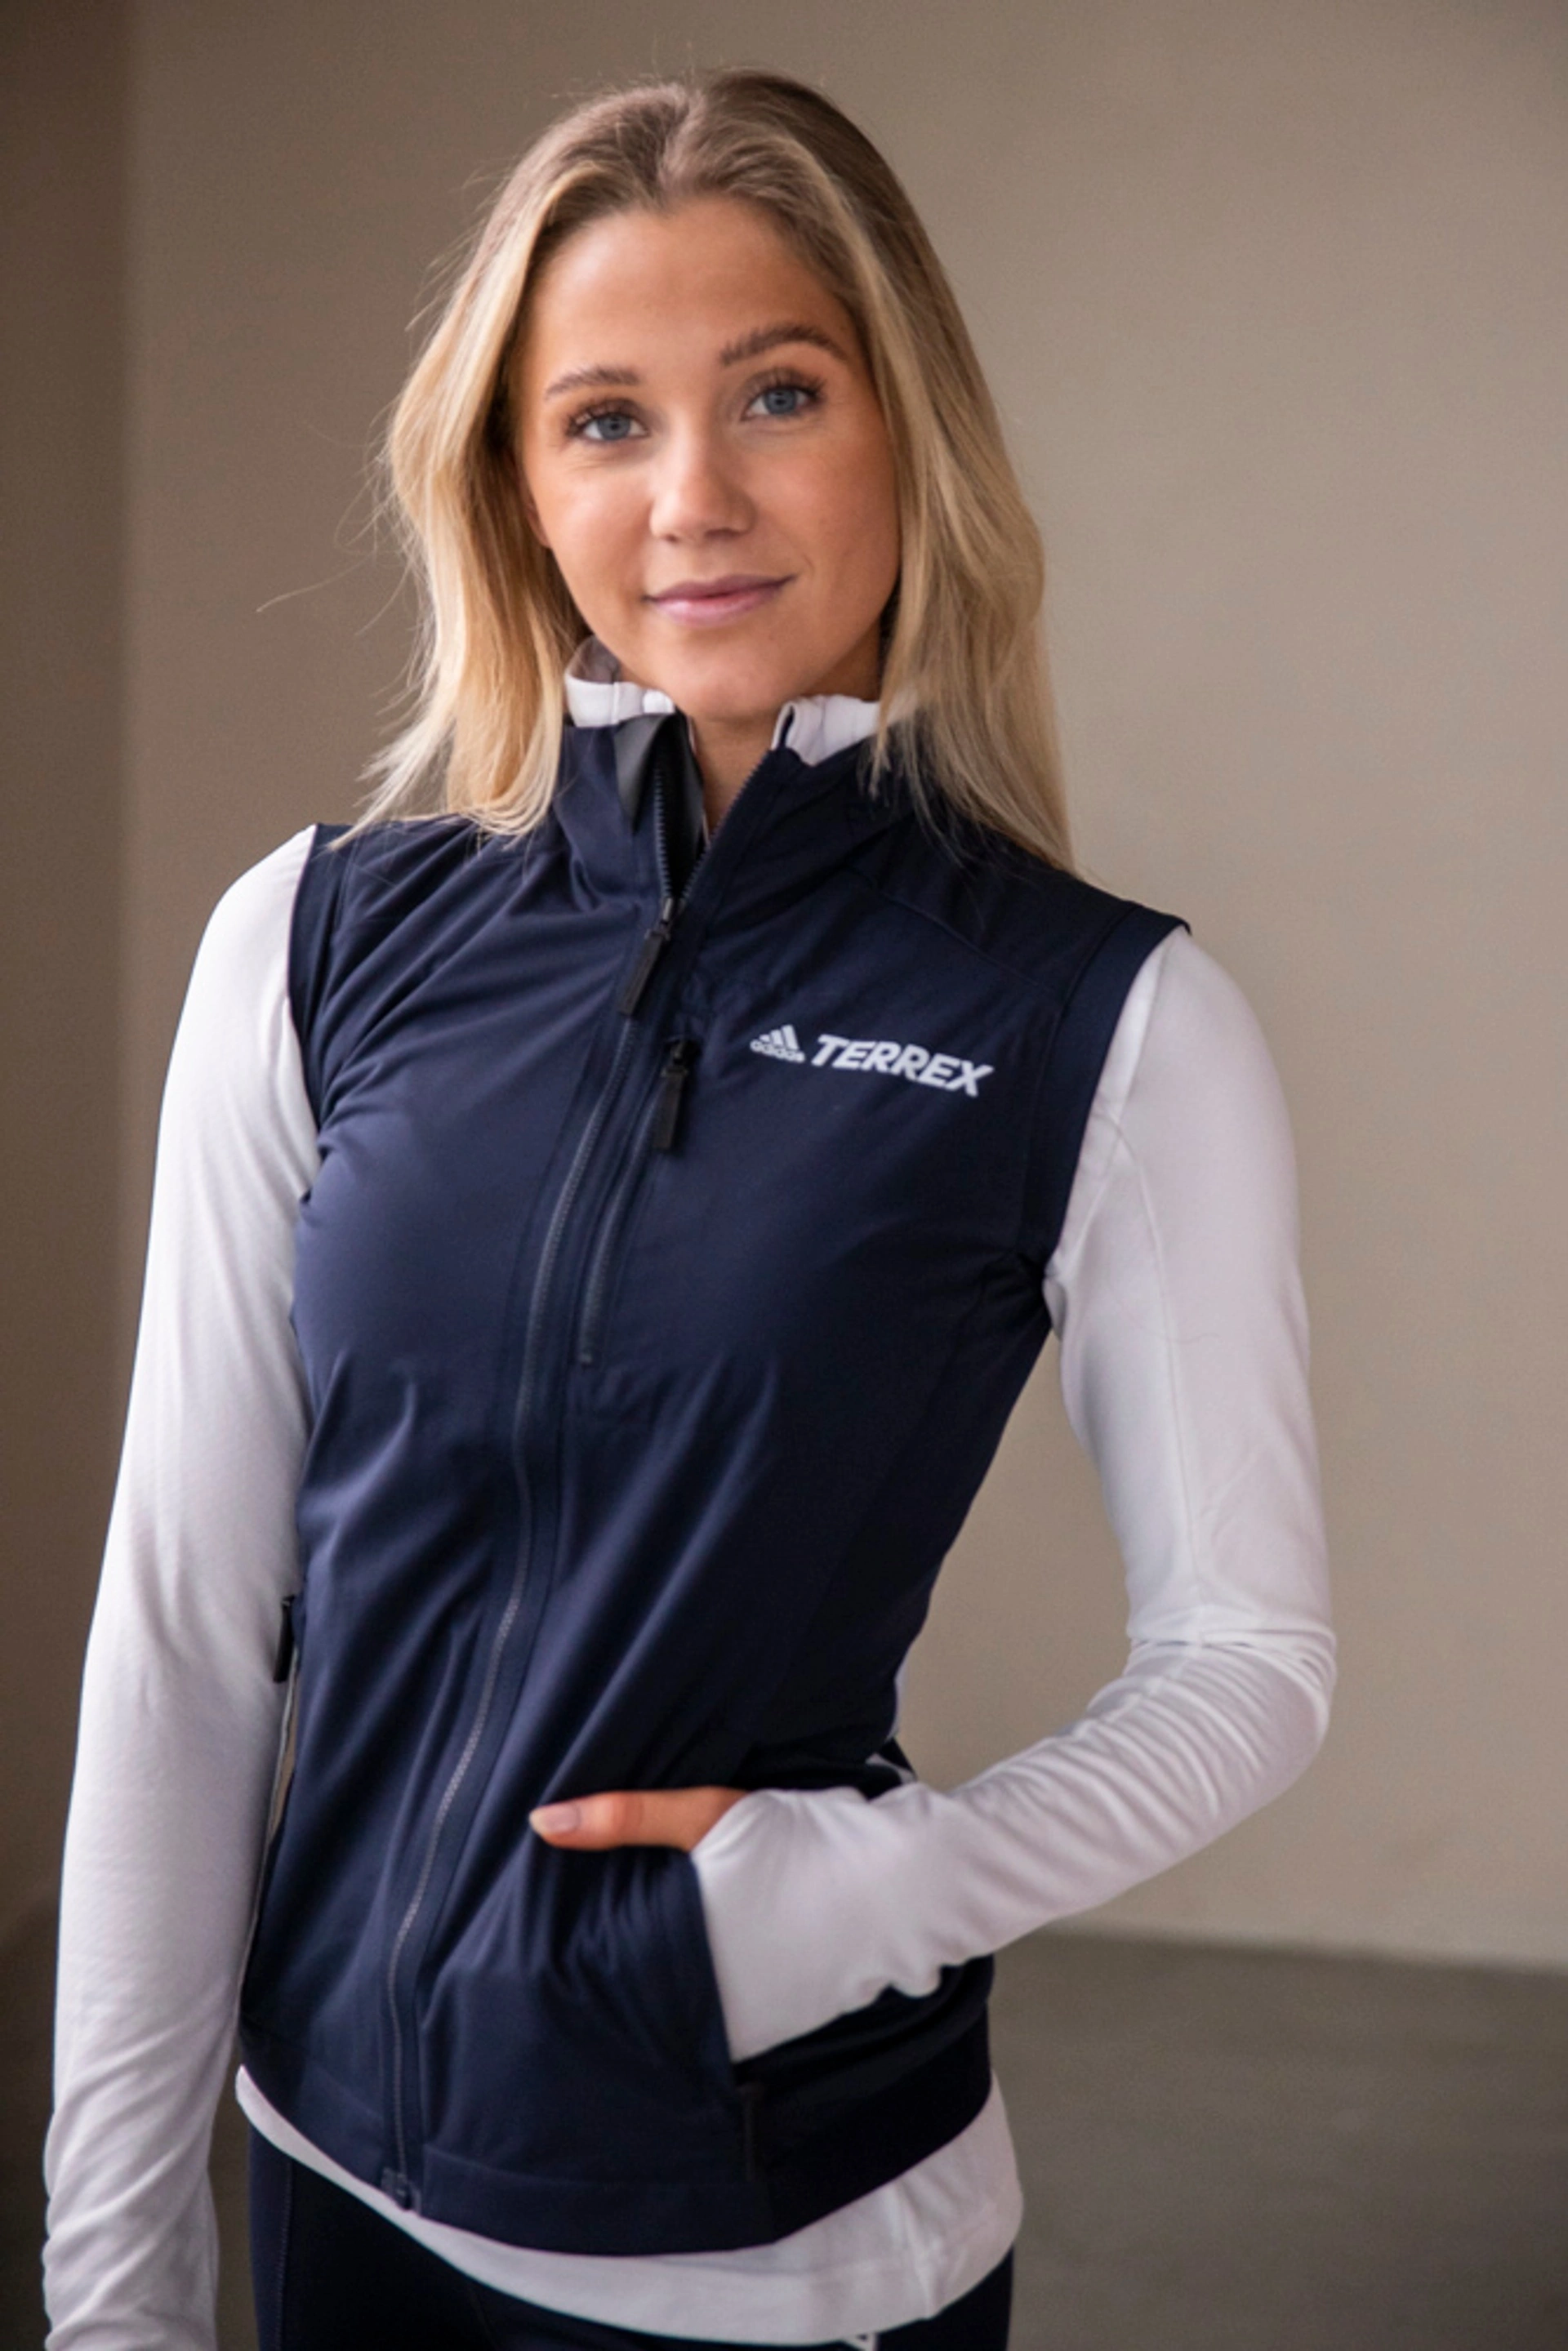 Shop the look - Terrex Xperior Cross-Country Ski Soft Shell Vest